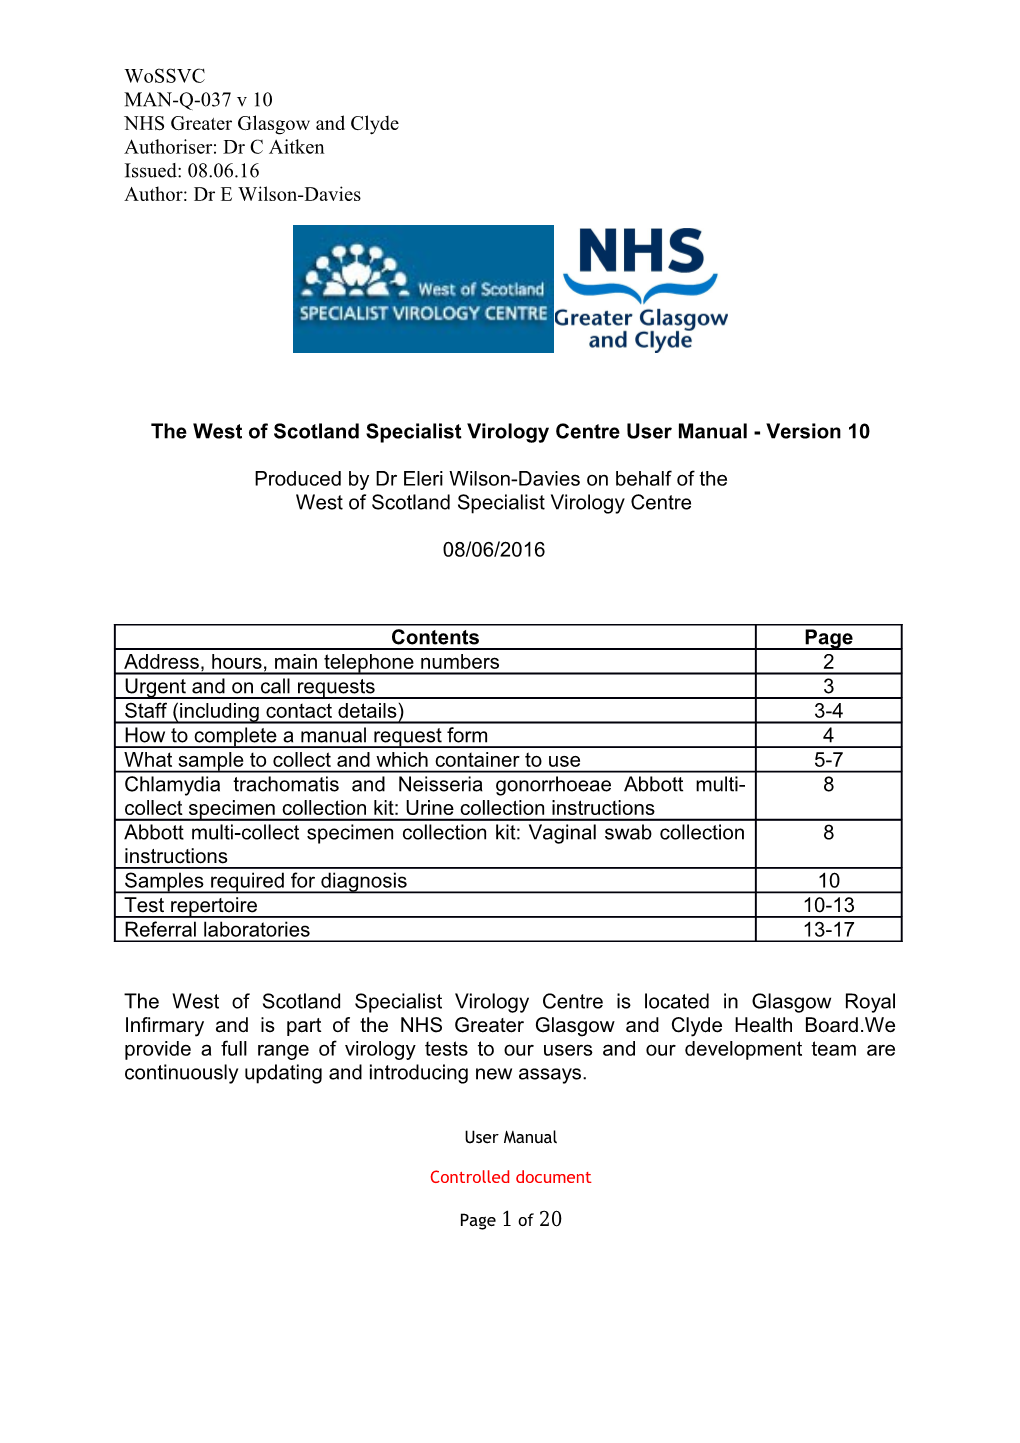 The West of Scotland Specialist Virology Centre User Manual - Version 10